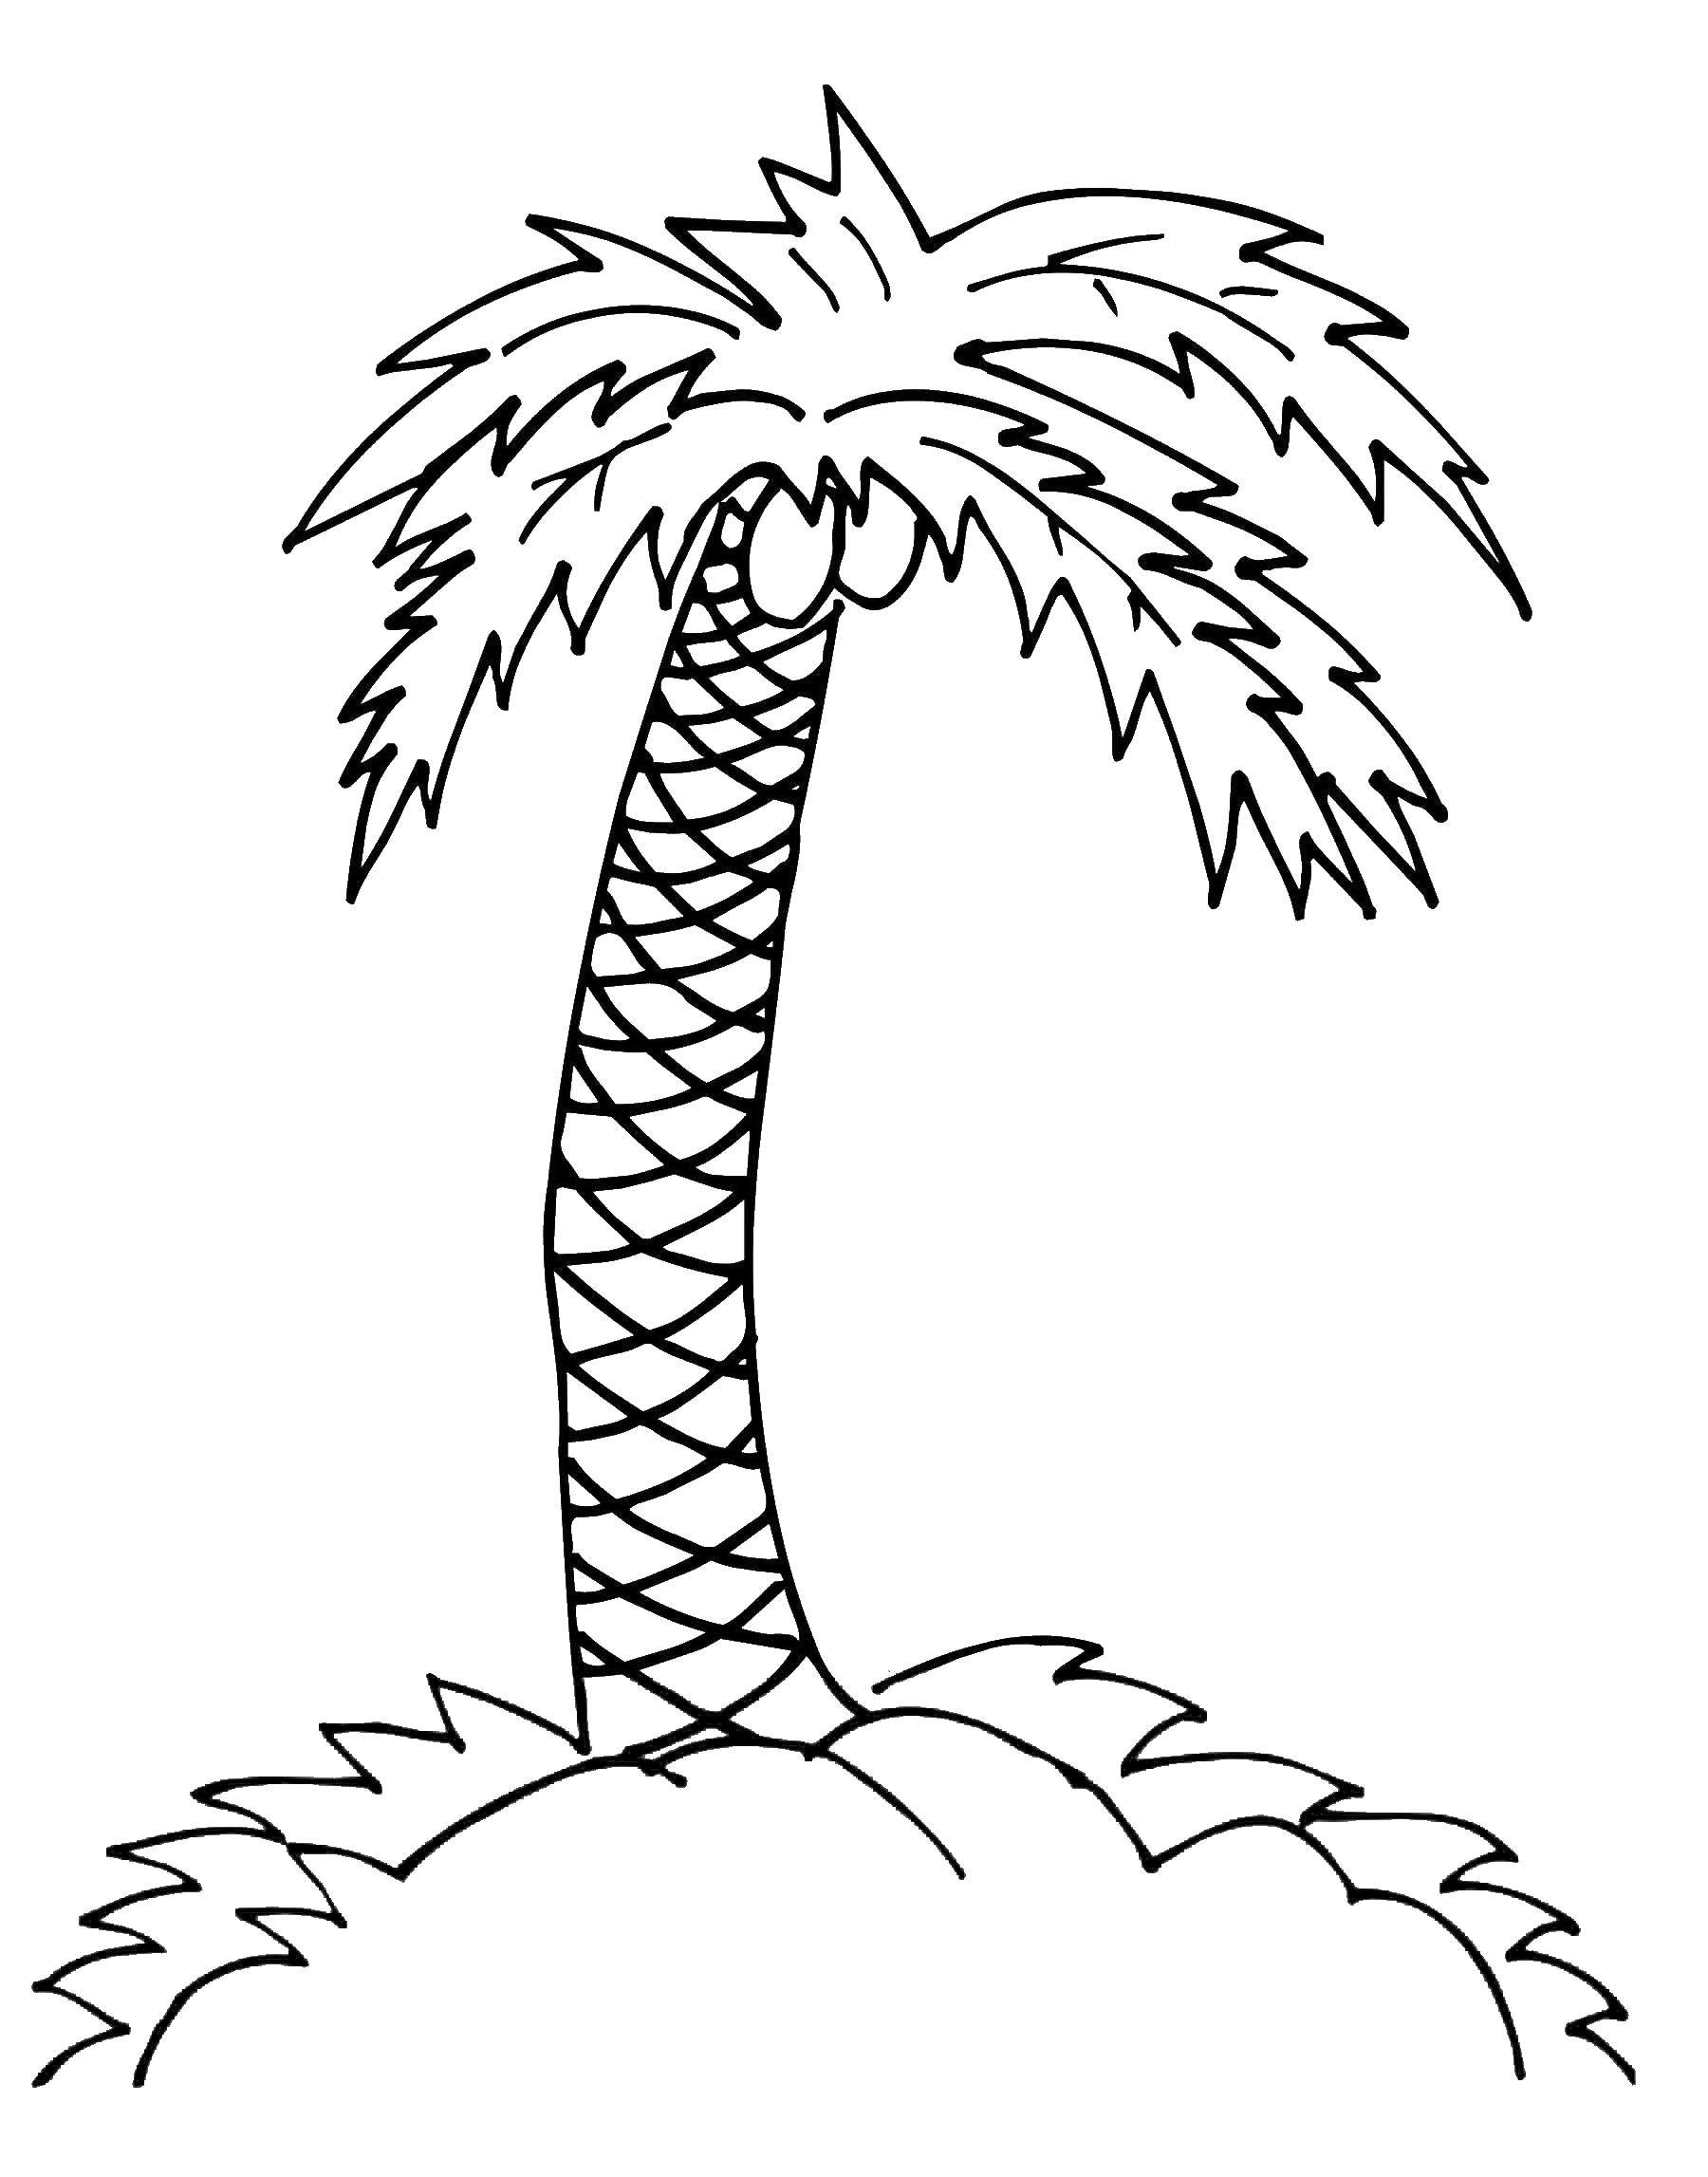 Coloring Palm tree with coconuts. Category tree. Tags:  palm, coconut.